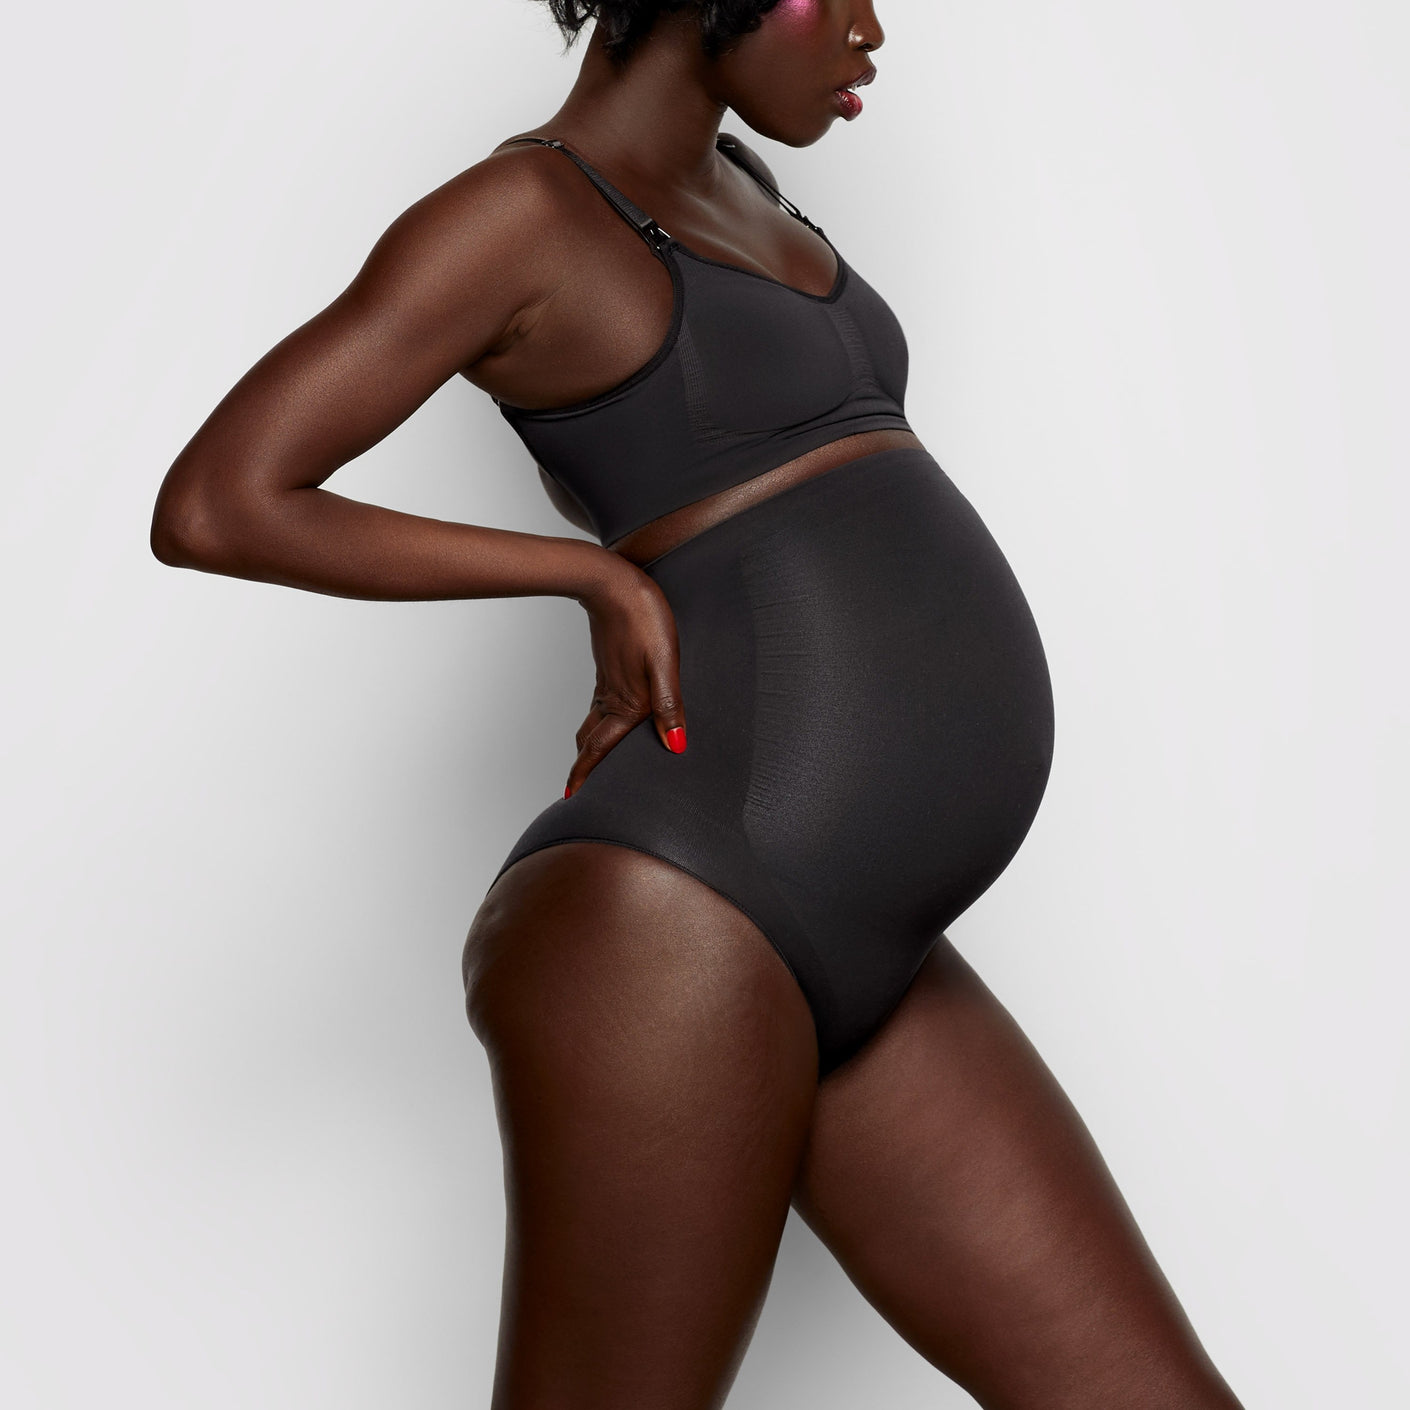 SKIMS - Maternity shapewear - provides support that keeps you comfortable  all day long. Shop SKIMS Maternity shapewear in 9 colors and in sizes XXS -  5X